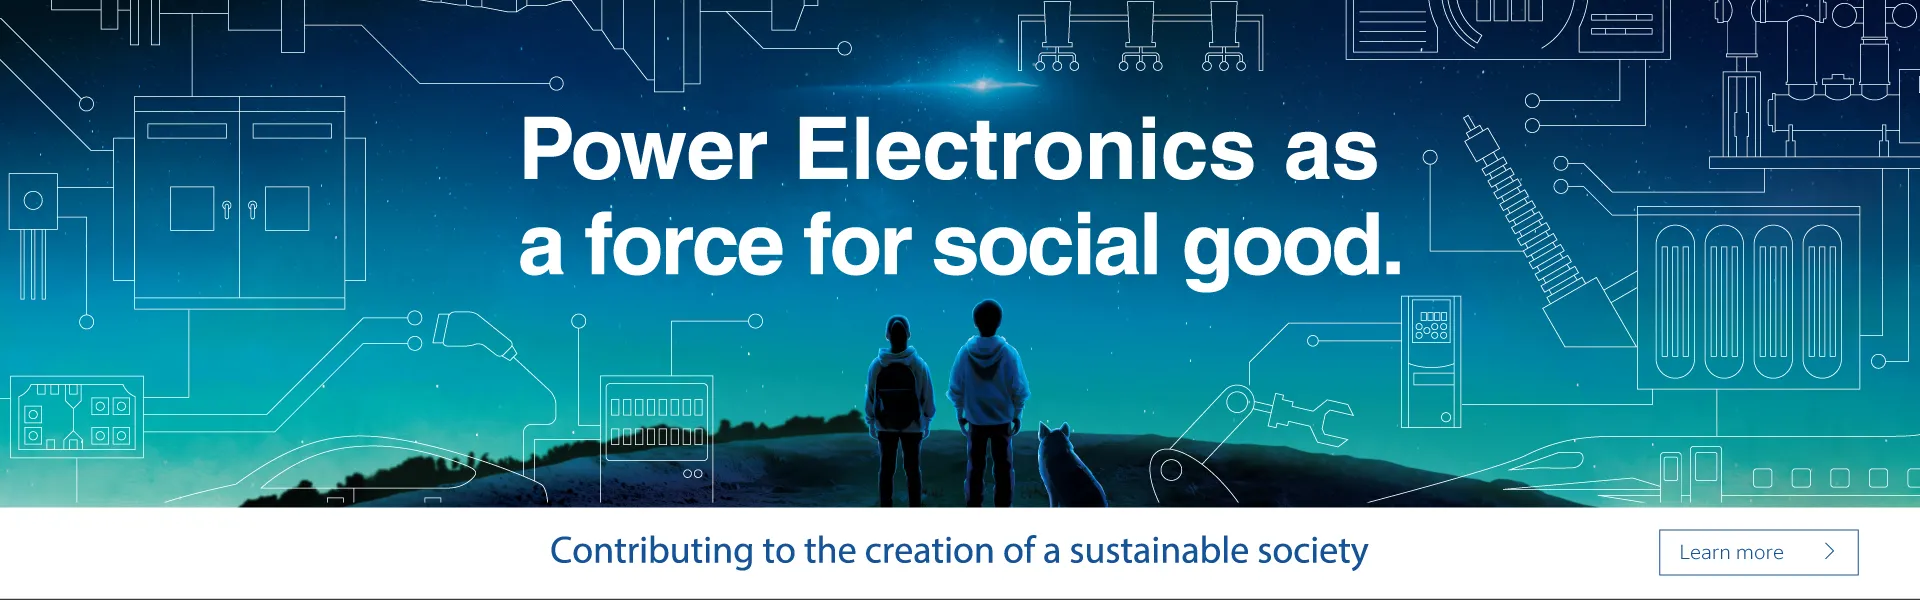 Power Electronics as a force social good. Contributing to the creation of a sustainable society.